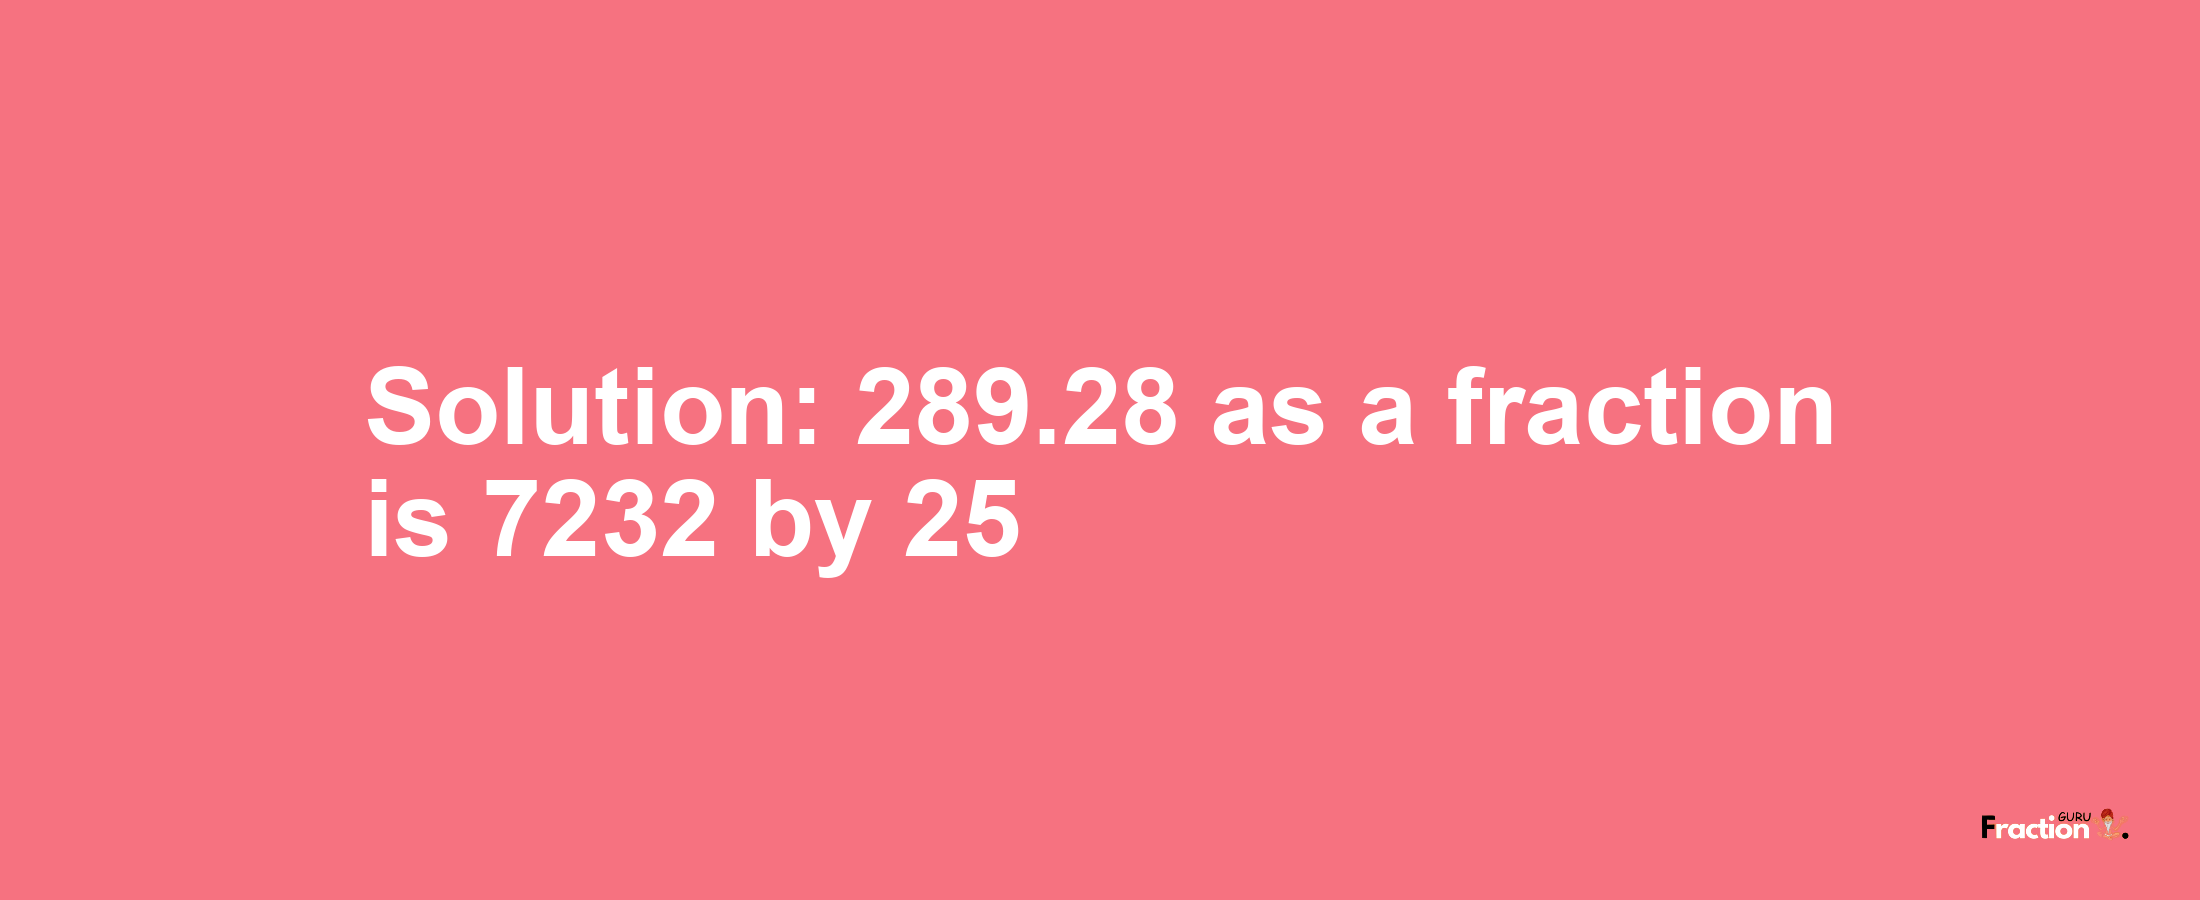 Solution:289.28 as a fraction is 7232/25